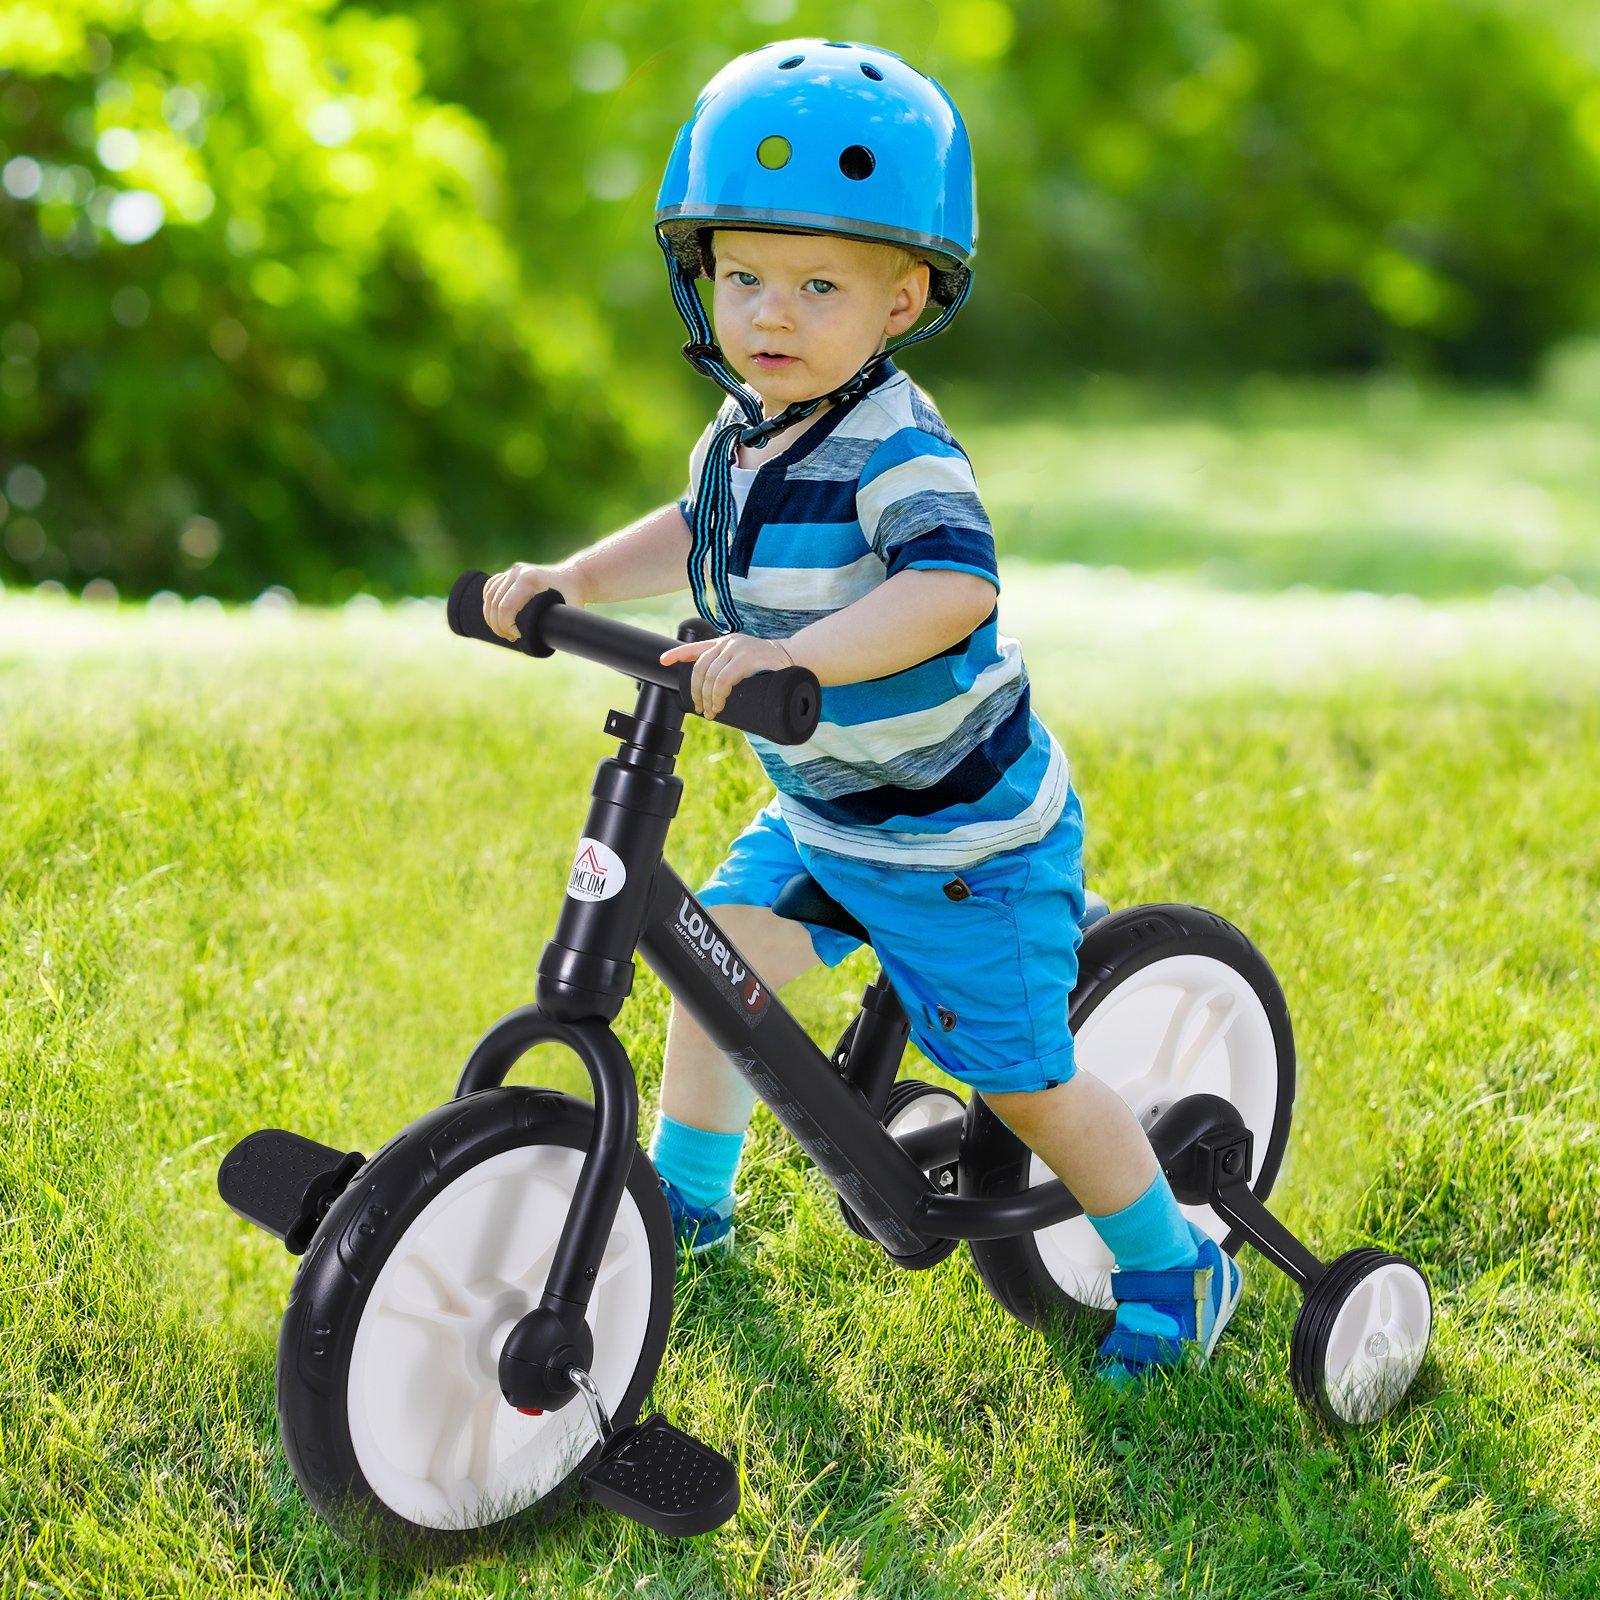 Kids Balance Training Bike Toy w/ Stabilizers Suitable For Child 2-5 Years